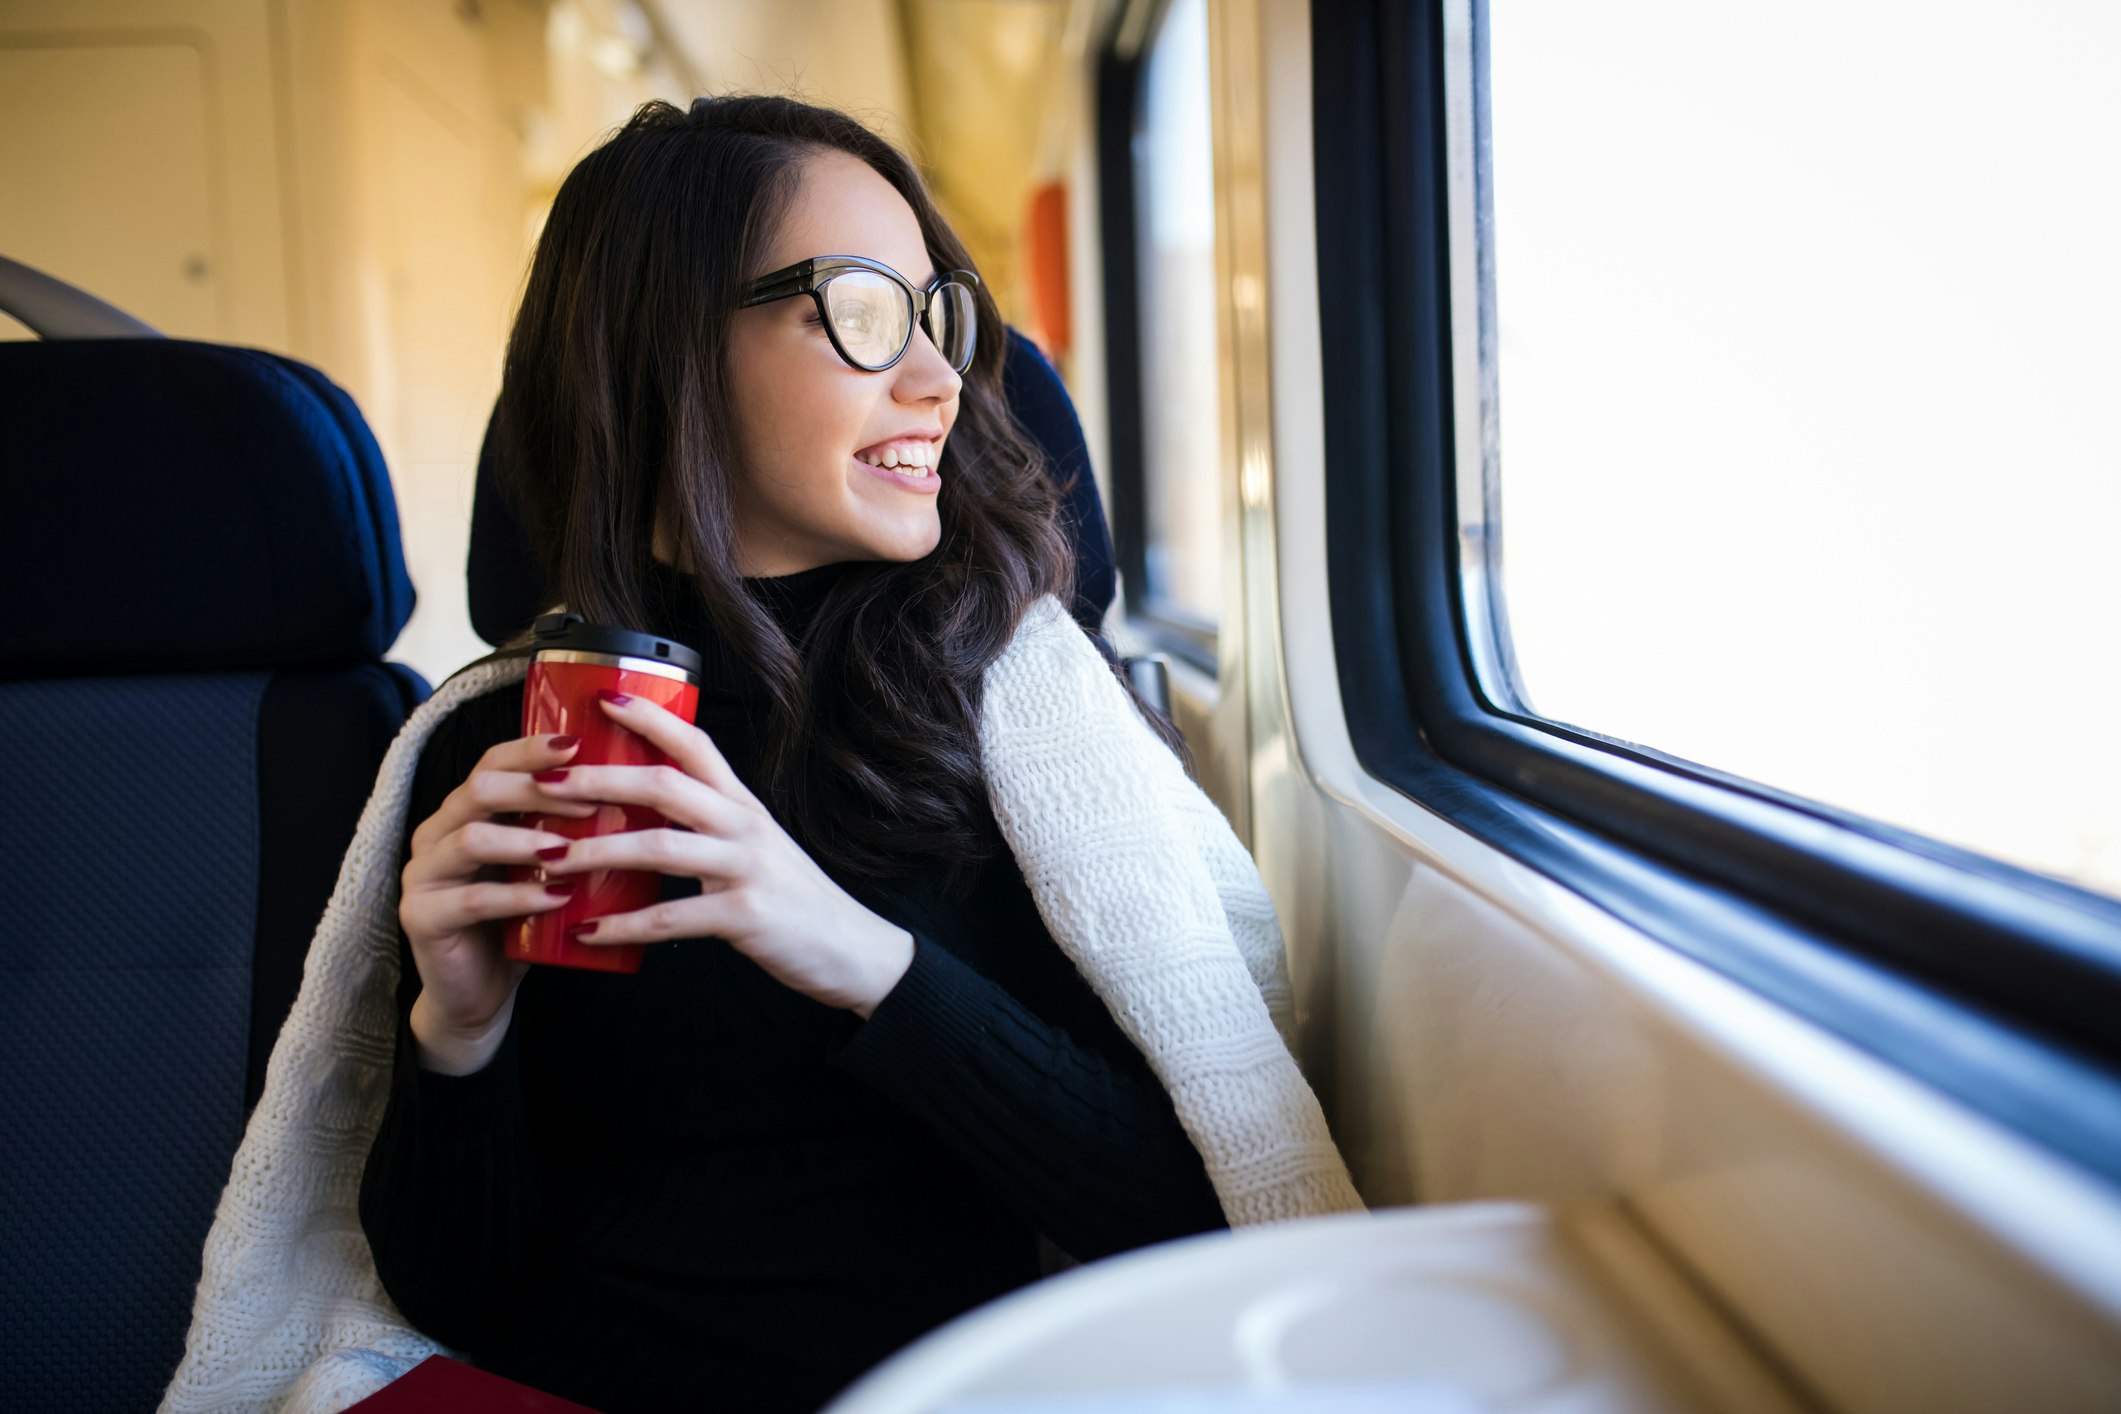 Smiling woman holding coffee cup on train